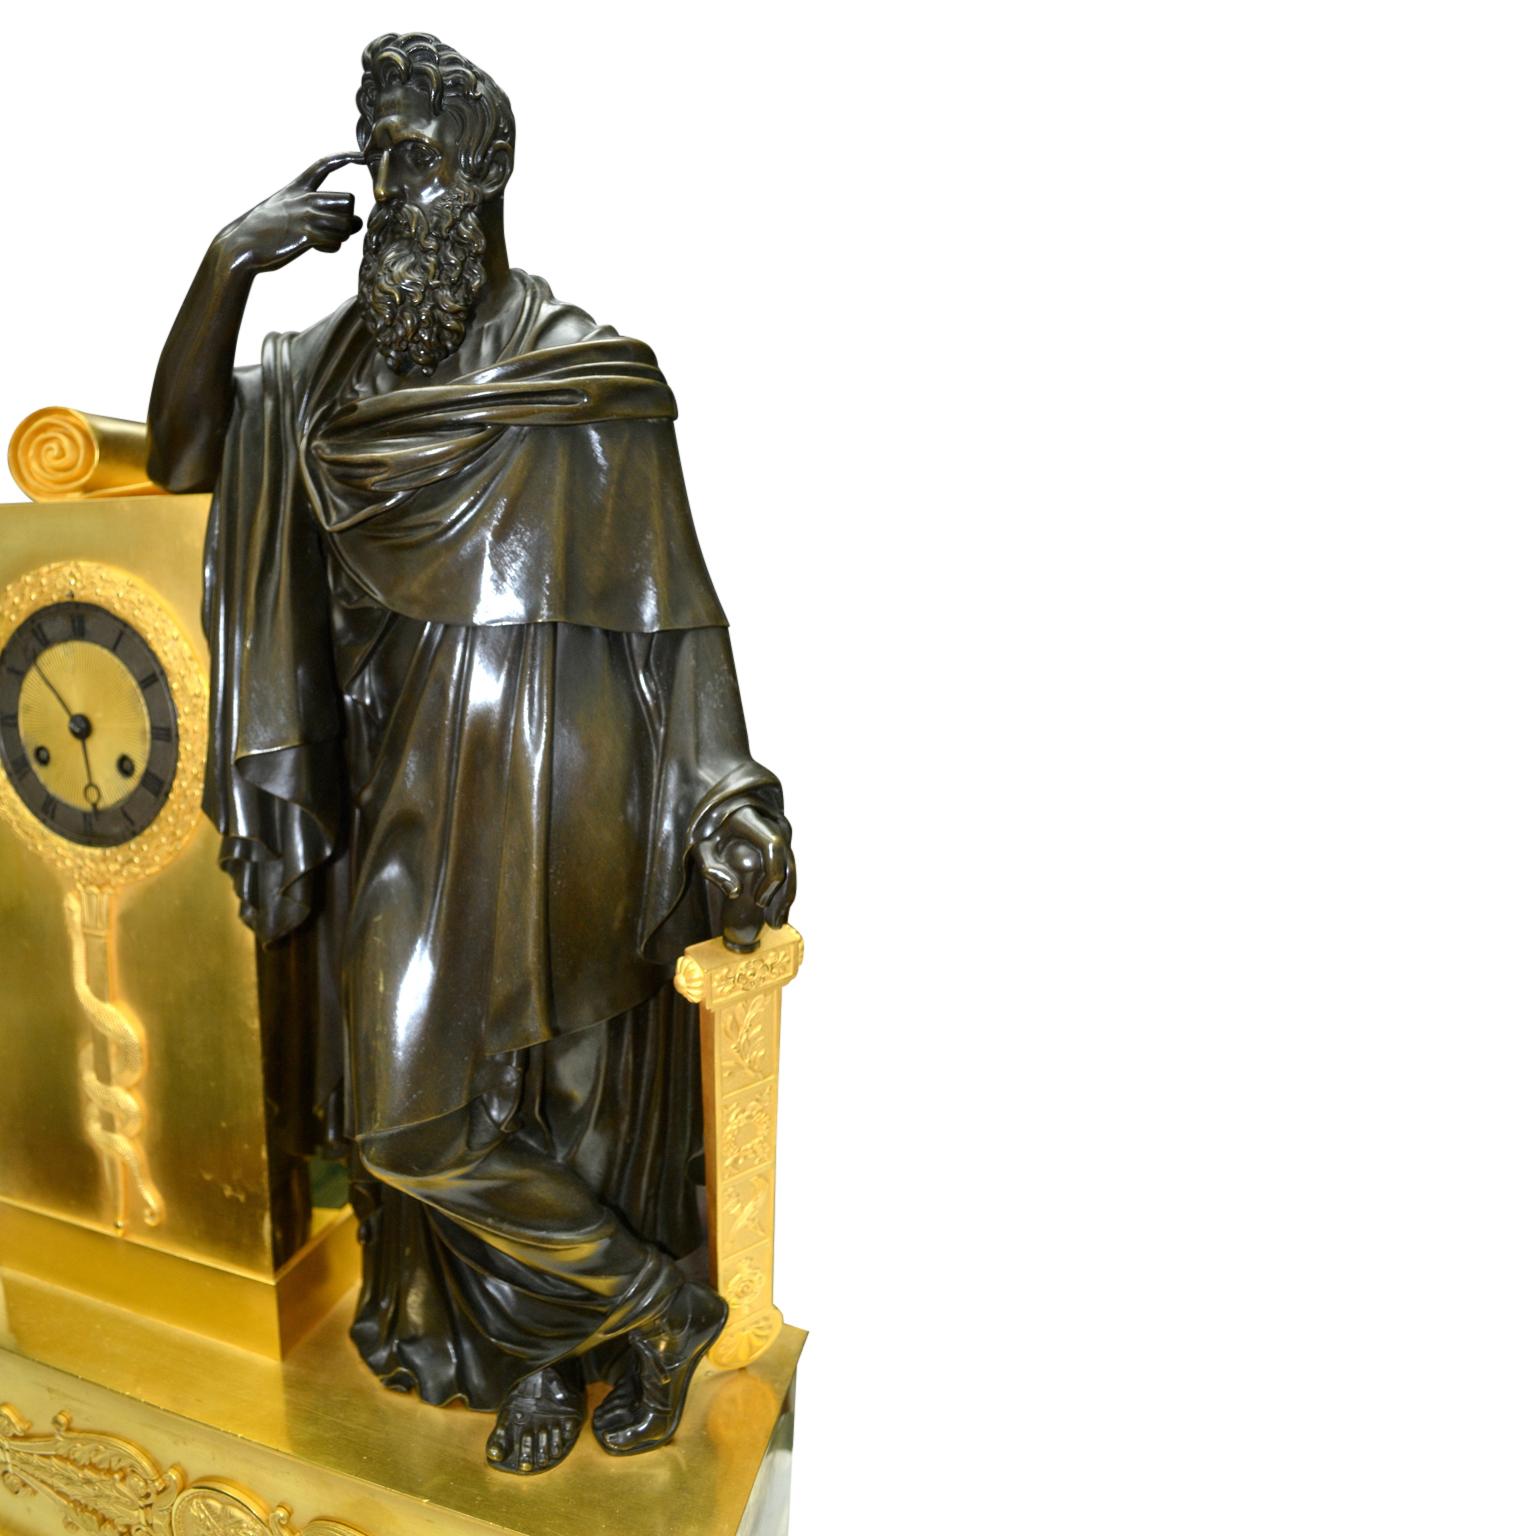 19th Century  French Empire Figural Bronze Clock Depicting an Allegory to Prudence or Wisdom For Sale